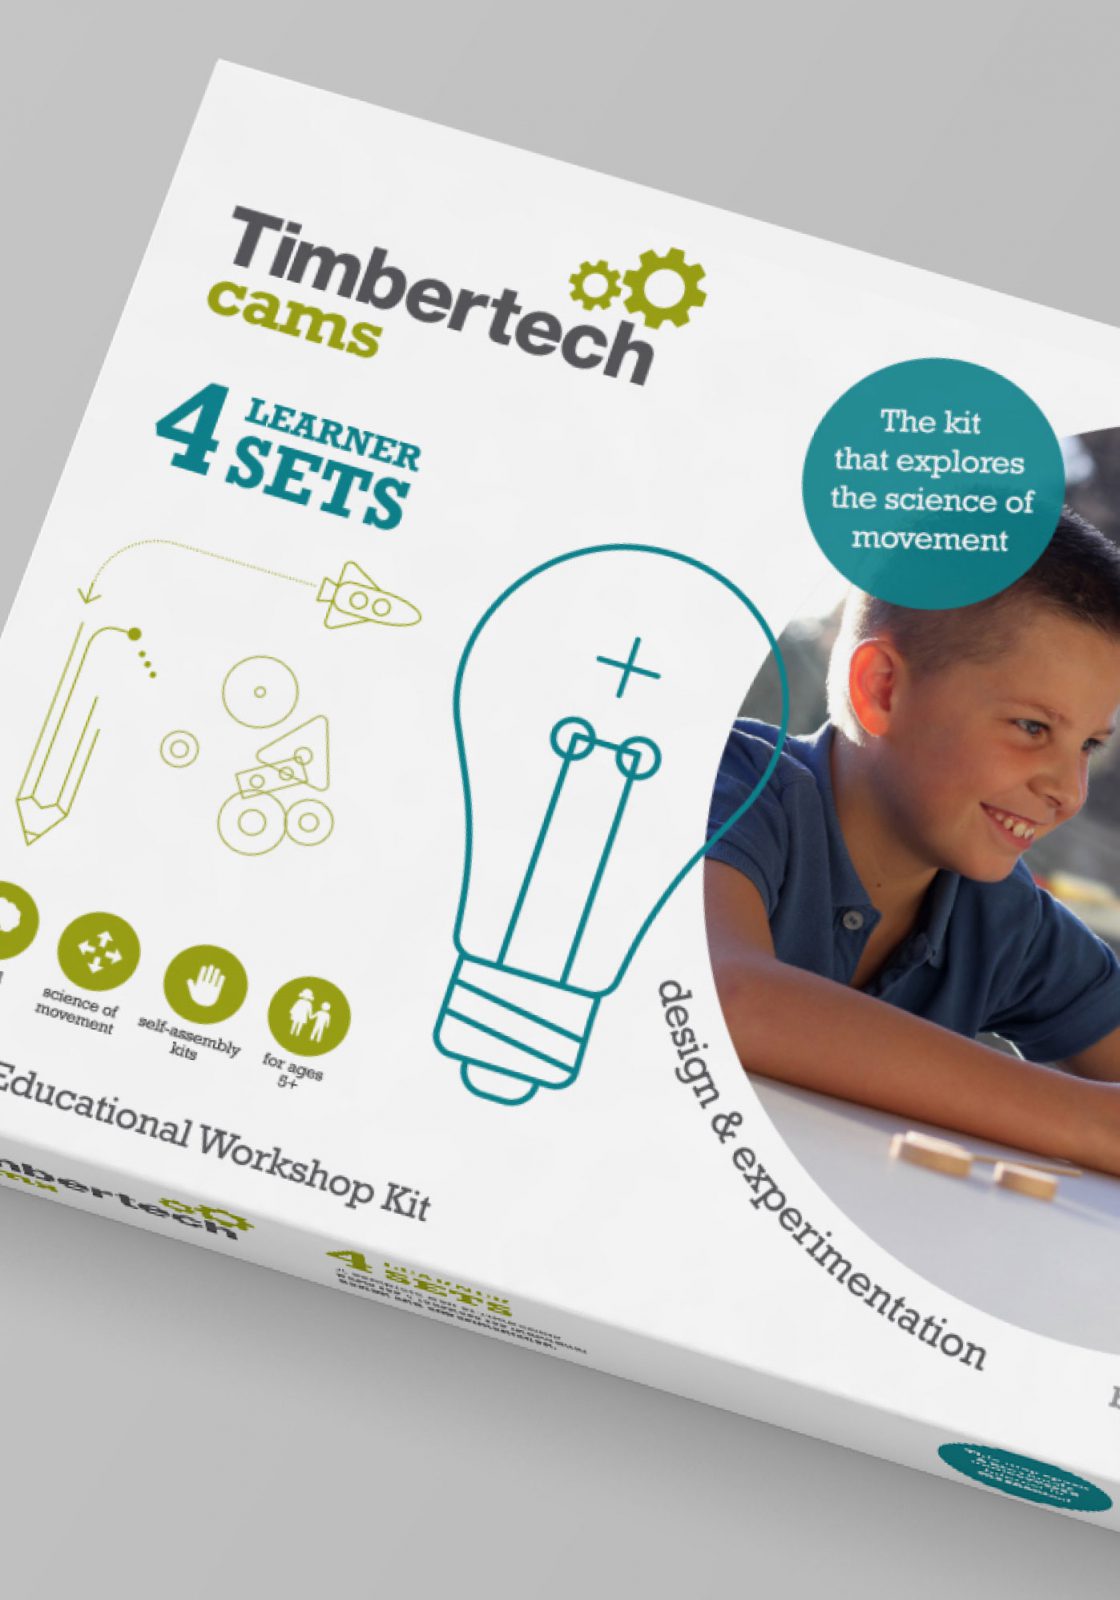 Timberkits learner sets